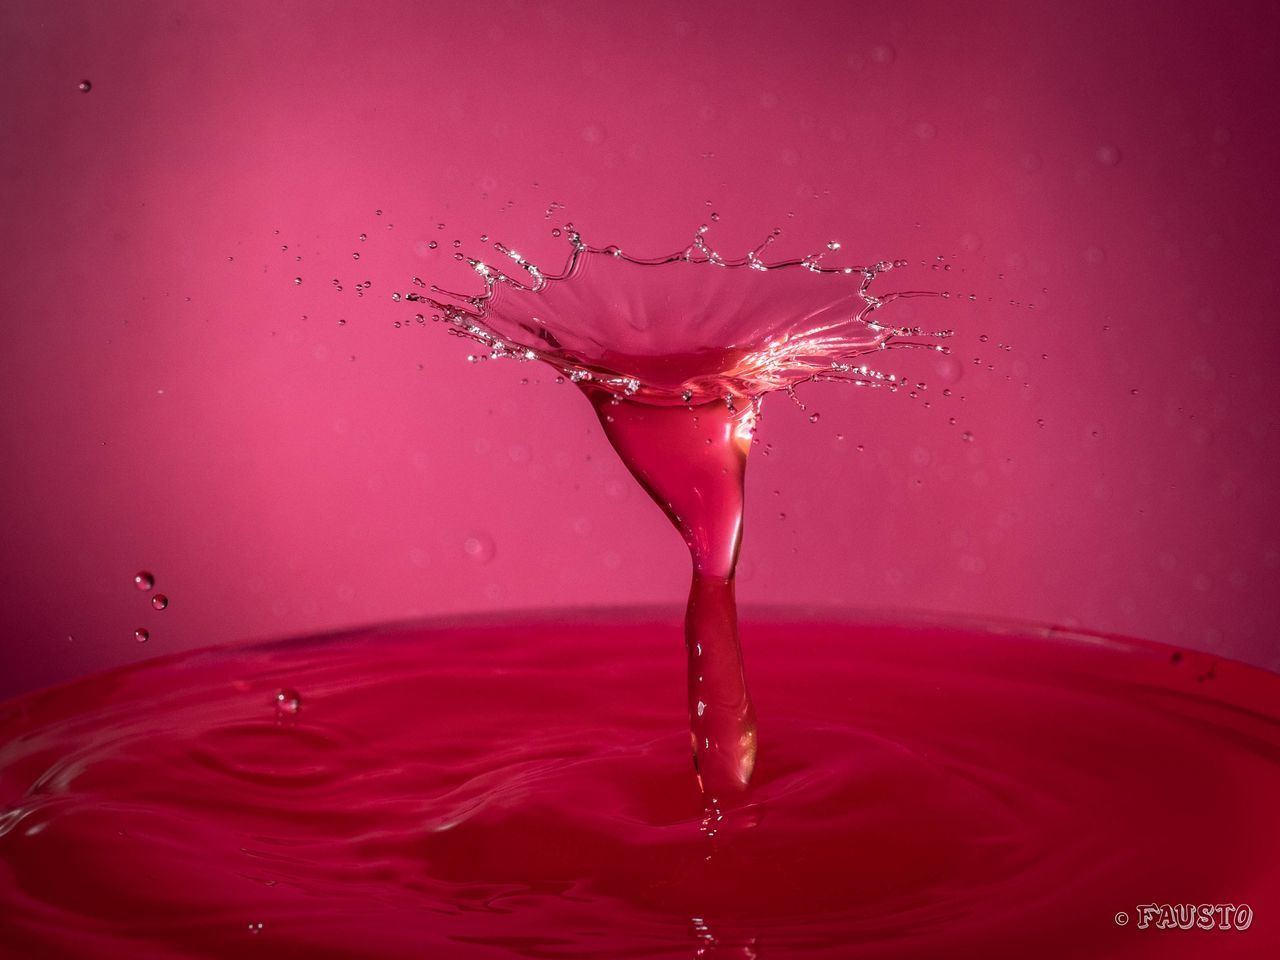 CLOSE-UP OF WATER DROP FALLING ON RED PINK FLOWER